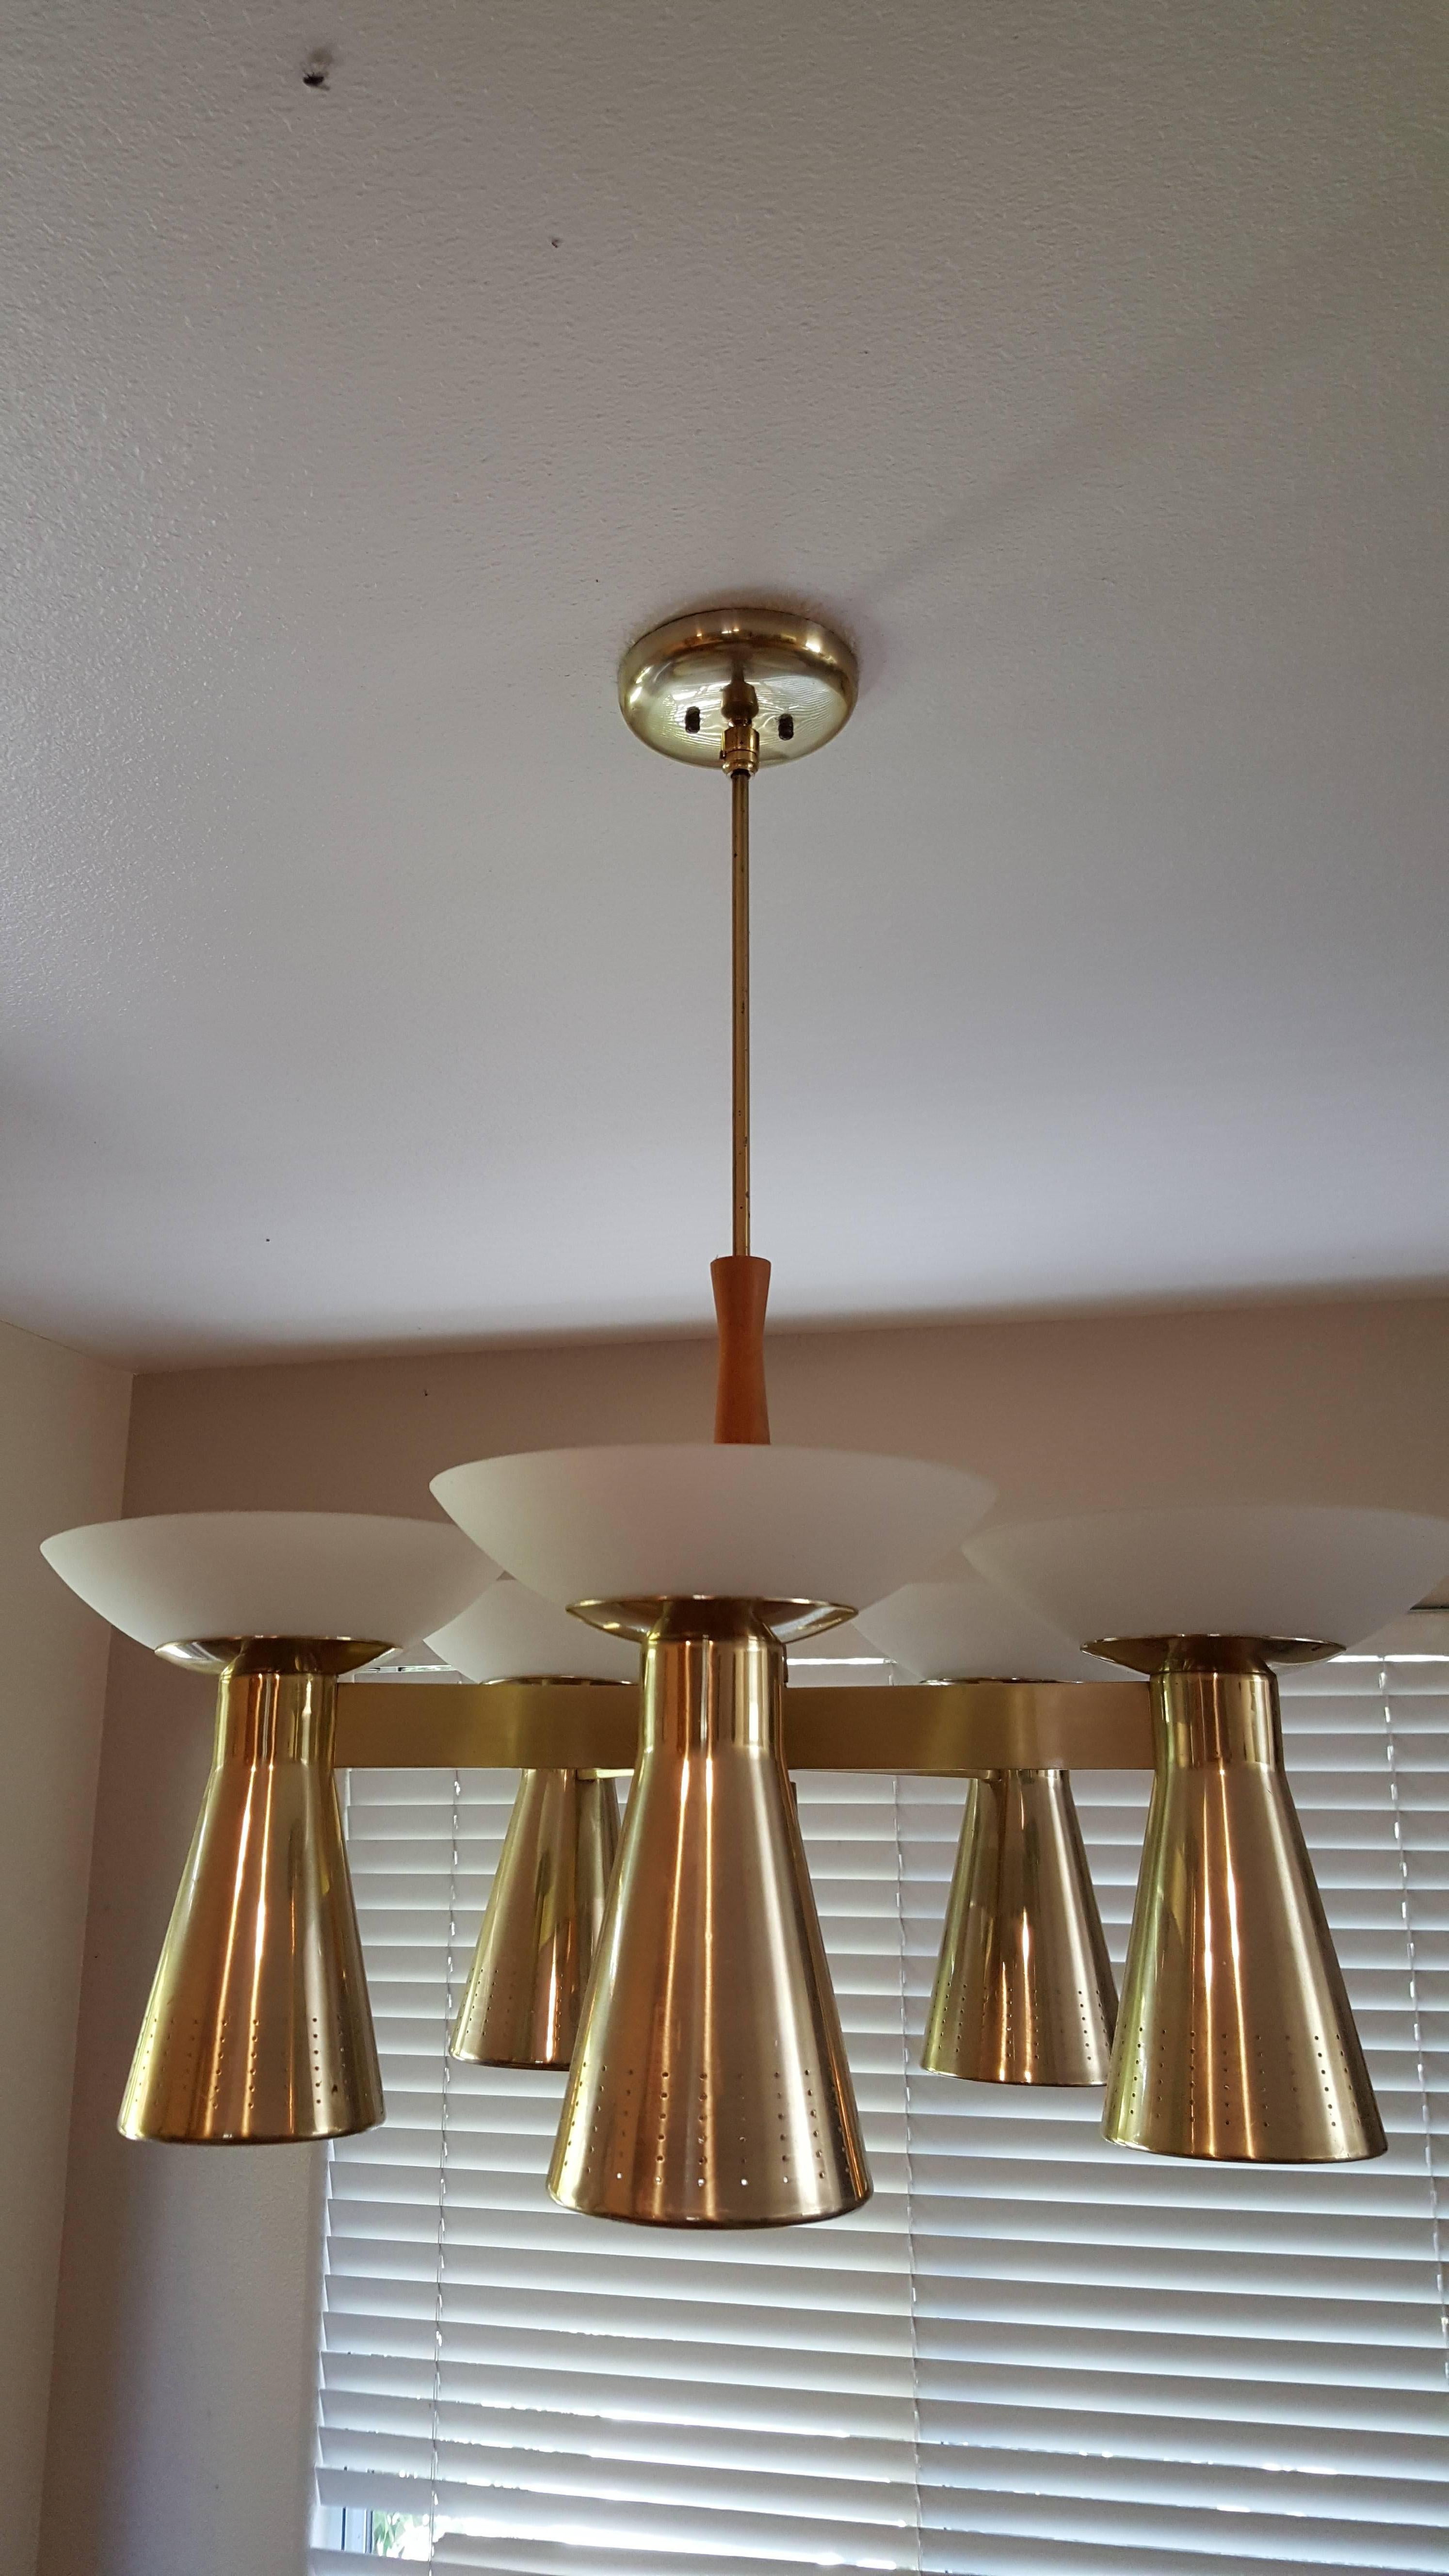 Classic Danish Modern design ceiling fixture. Conical brass down lights with classic pierce cut detail. Satin glass opaque up light shades. Beautiful polished brass finish with a walnut center support. Versatile lighting options with 5 up-light and